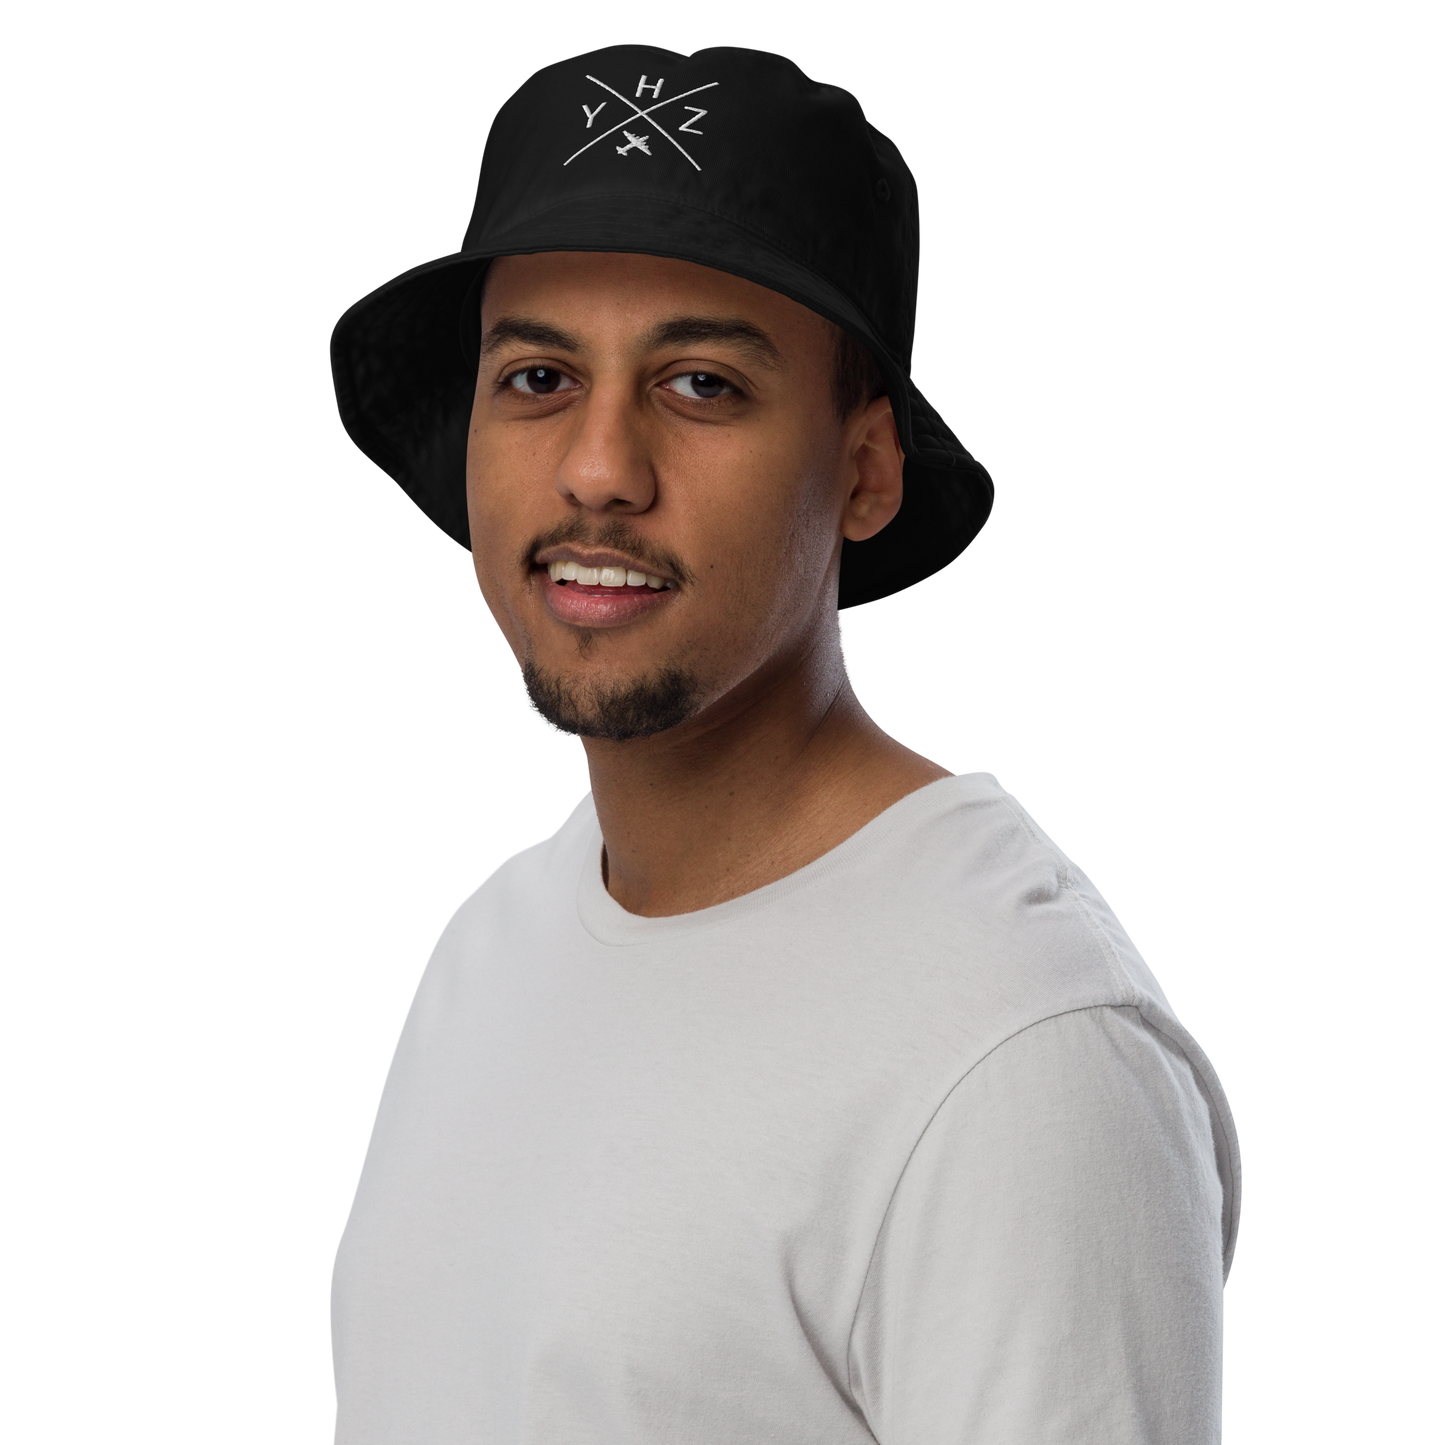 YHM Designs - YHZ Halifax Organic Cotton Bucket Hat - Crossed-X Design with Airport Code and Vintage Propliner - White Embroidery - Image 05